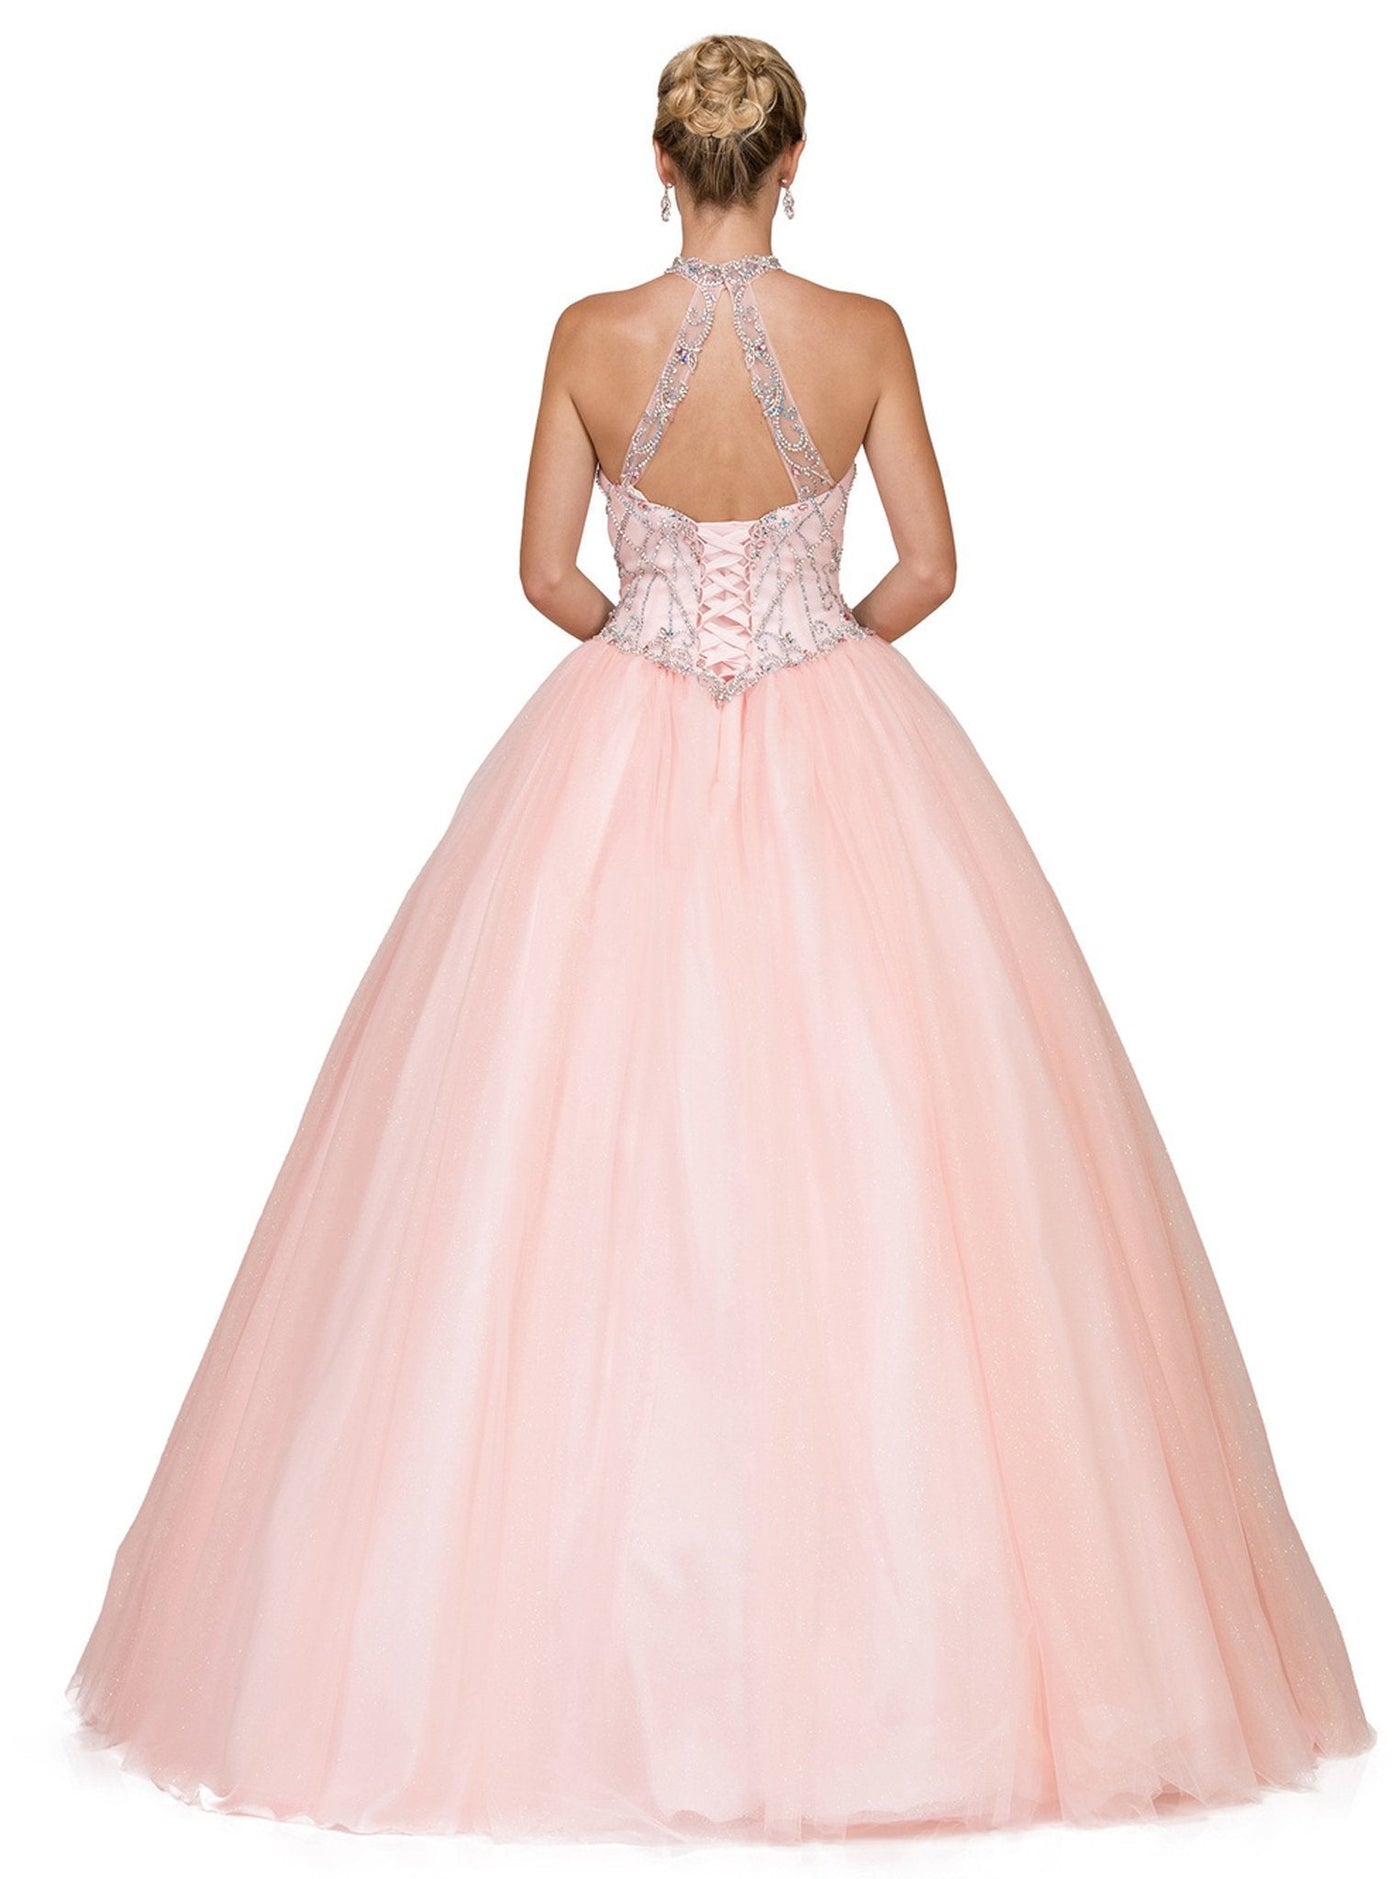 Dancing Queen - 1197 Jeweled Illusion Halter Quinceanera Ballgown Special Occasion Dress M / Blush